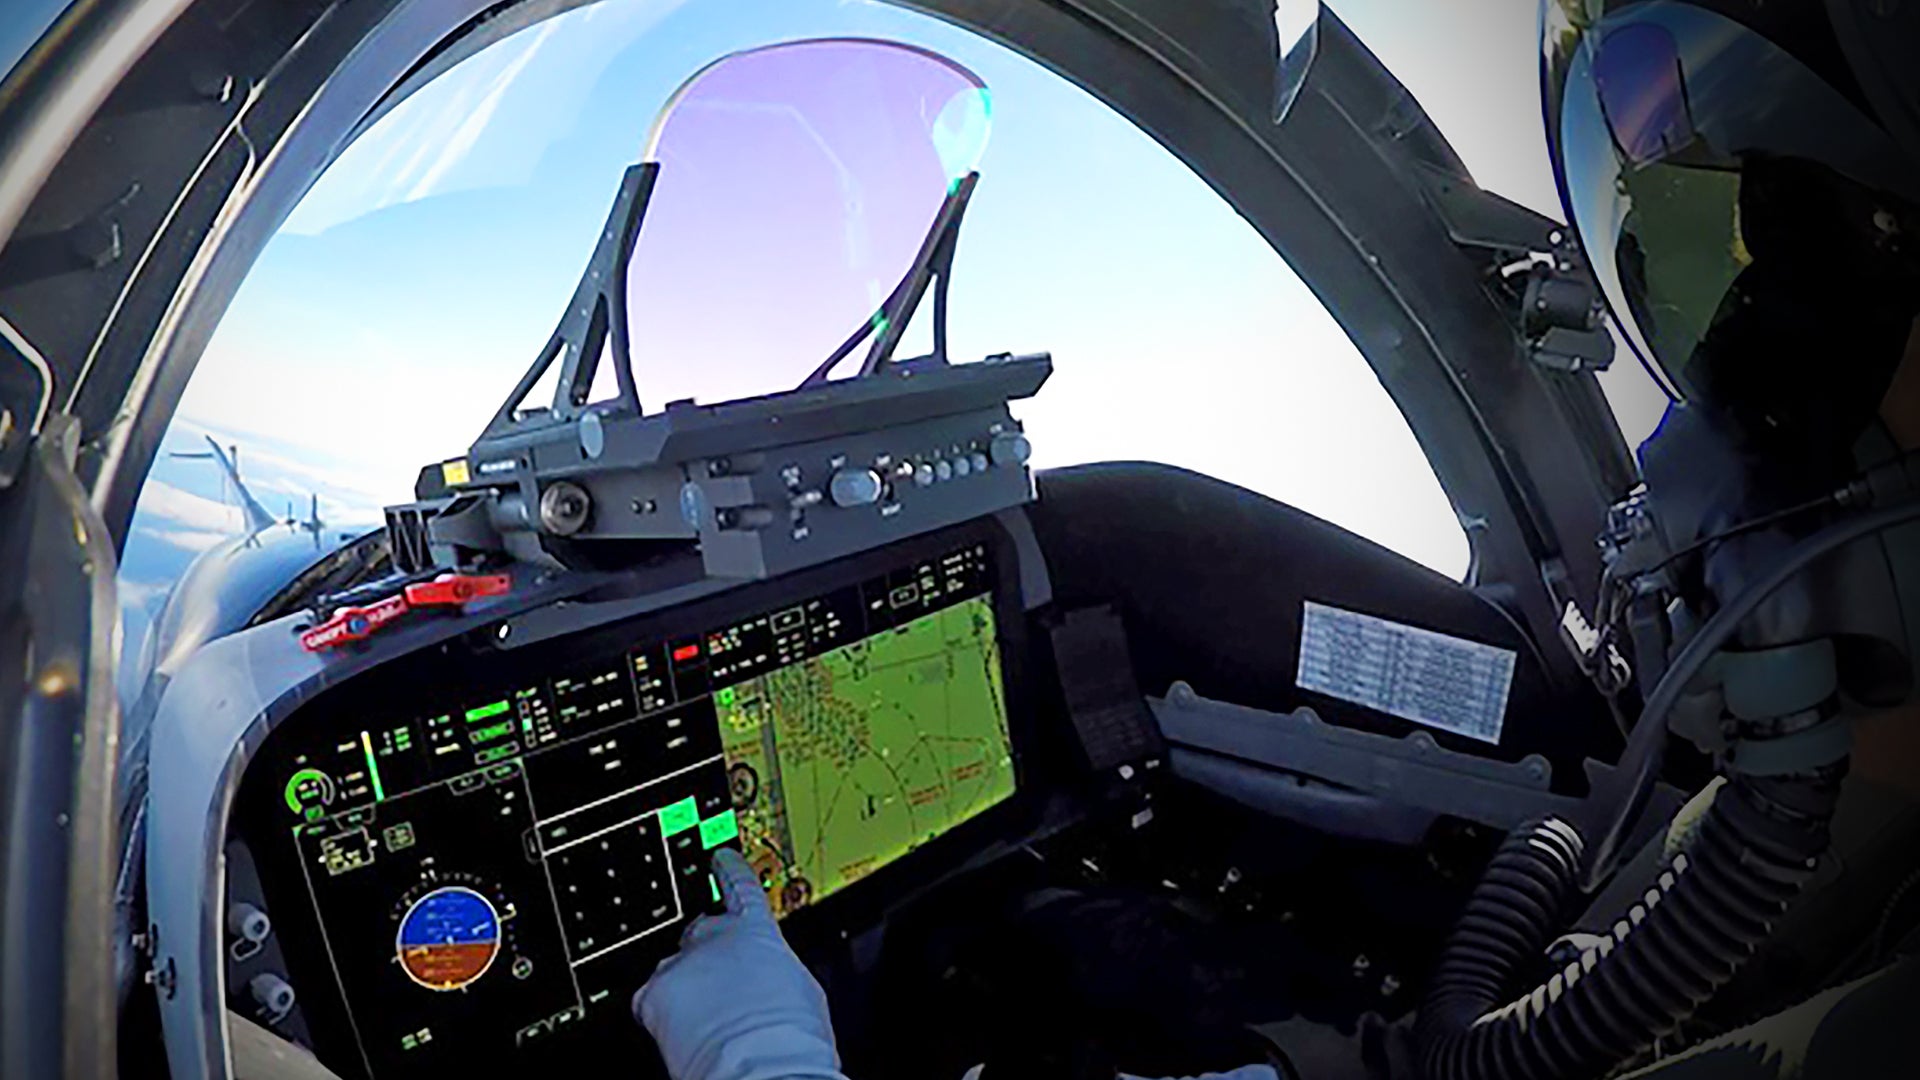 Qatar’s F-15s Will Feature New ‘Low Profile’ Heads Up Display And New Cockpit